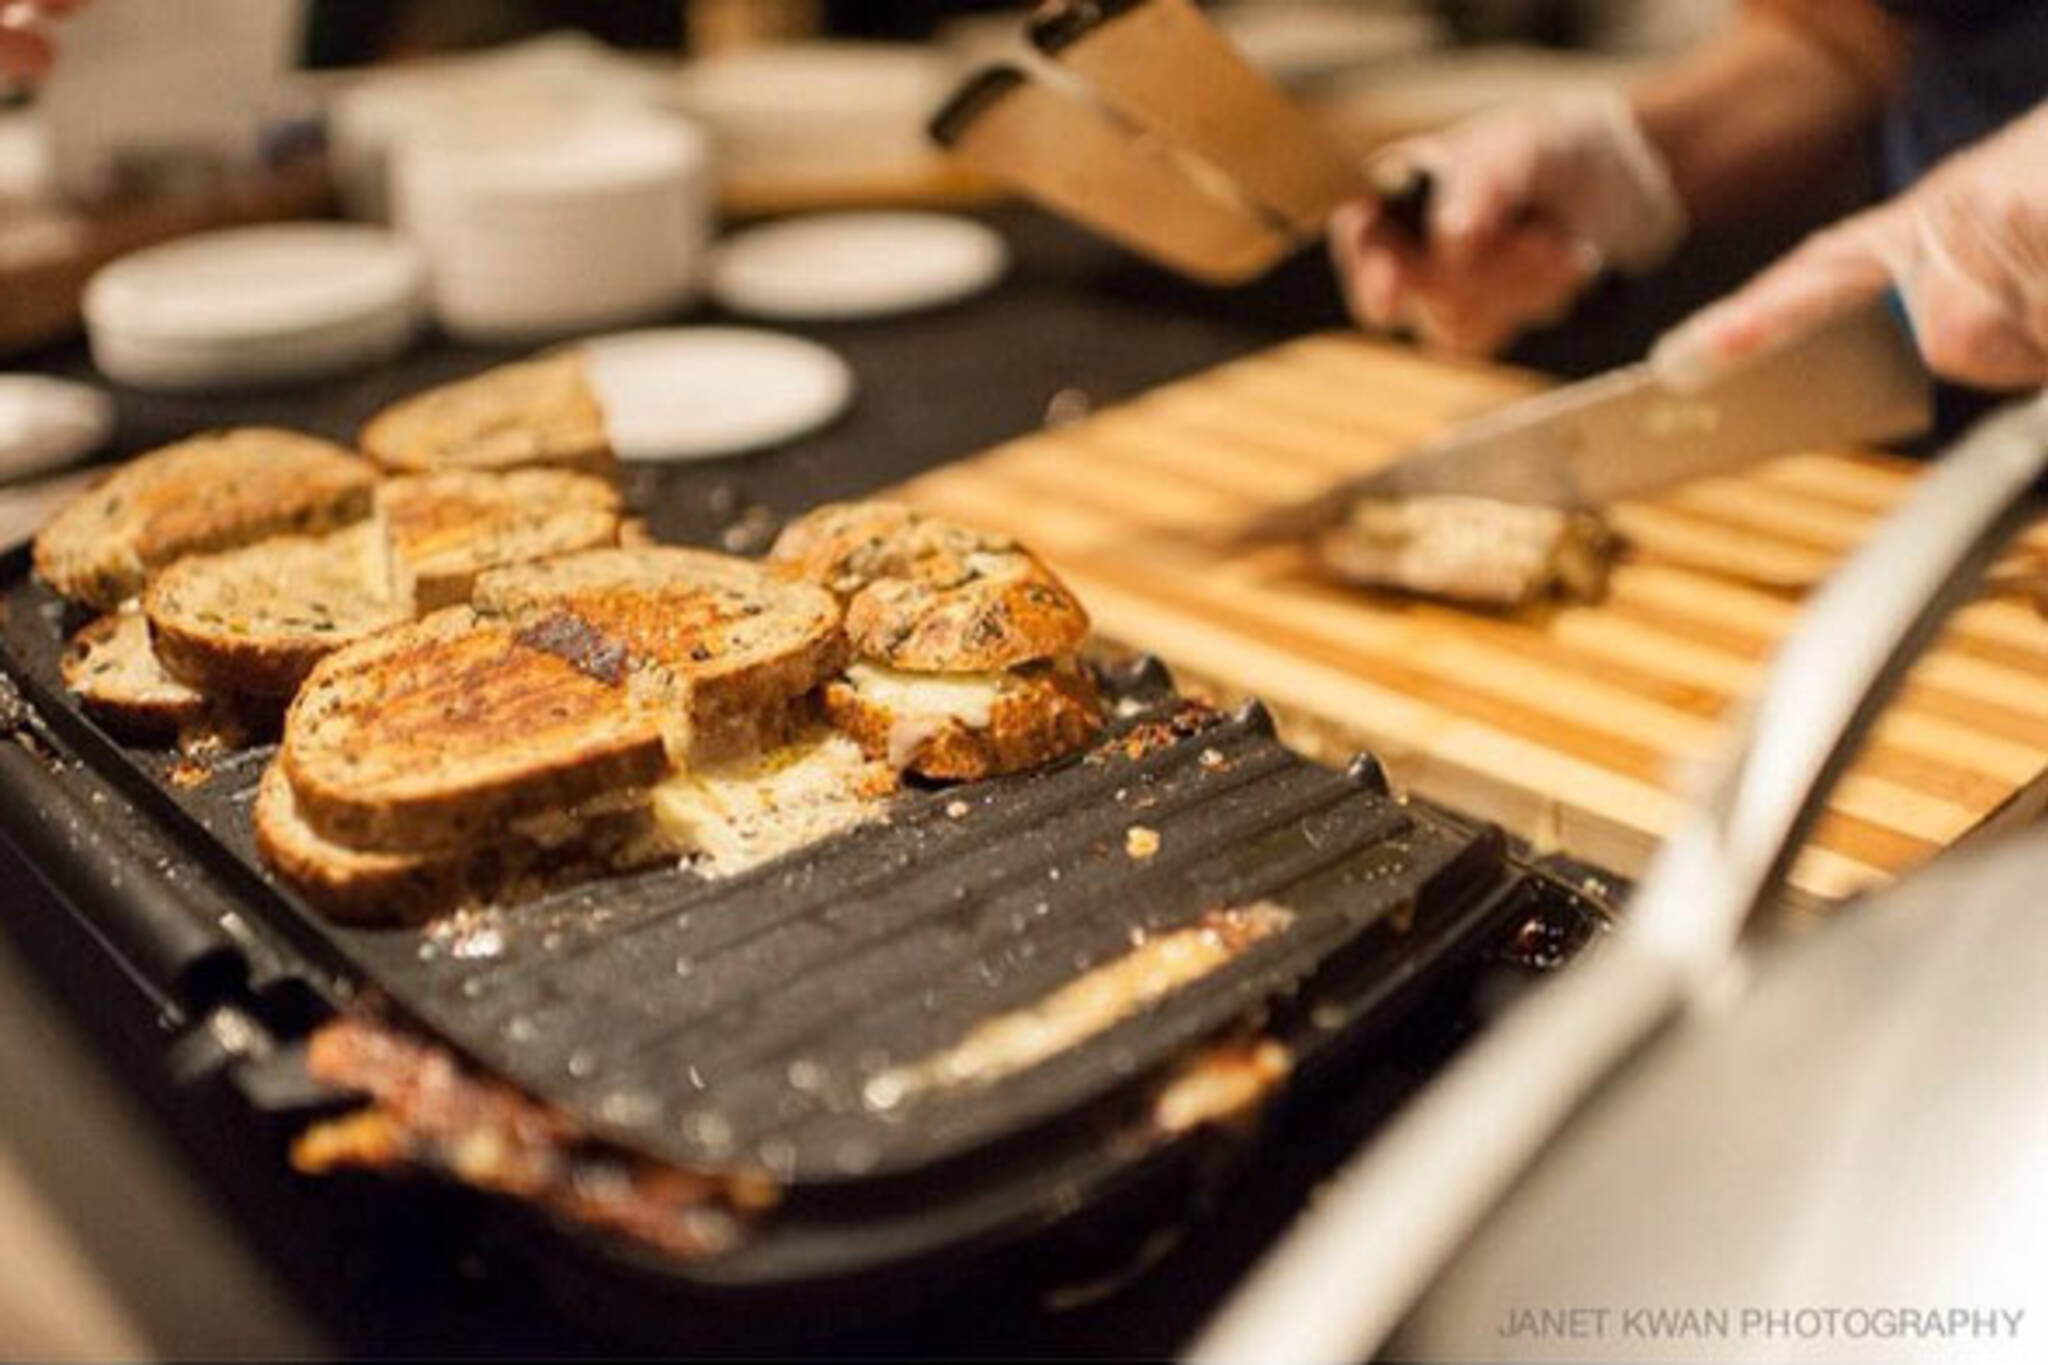 Toronto grilled cheese festival wasn't so Gouda